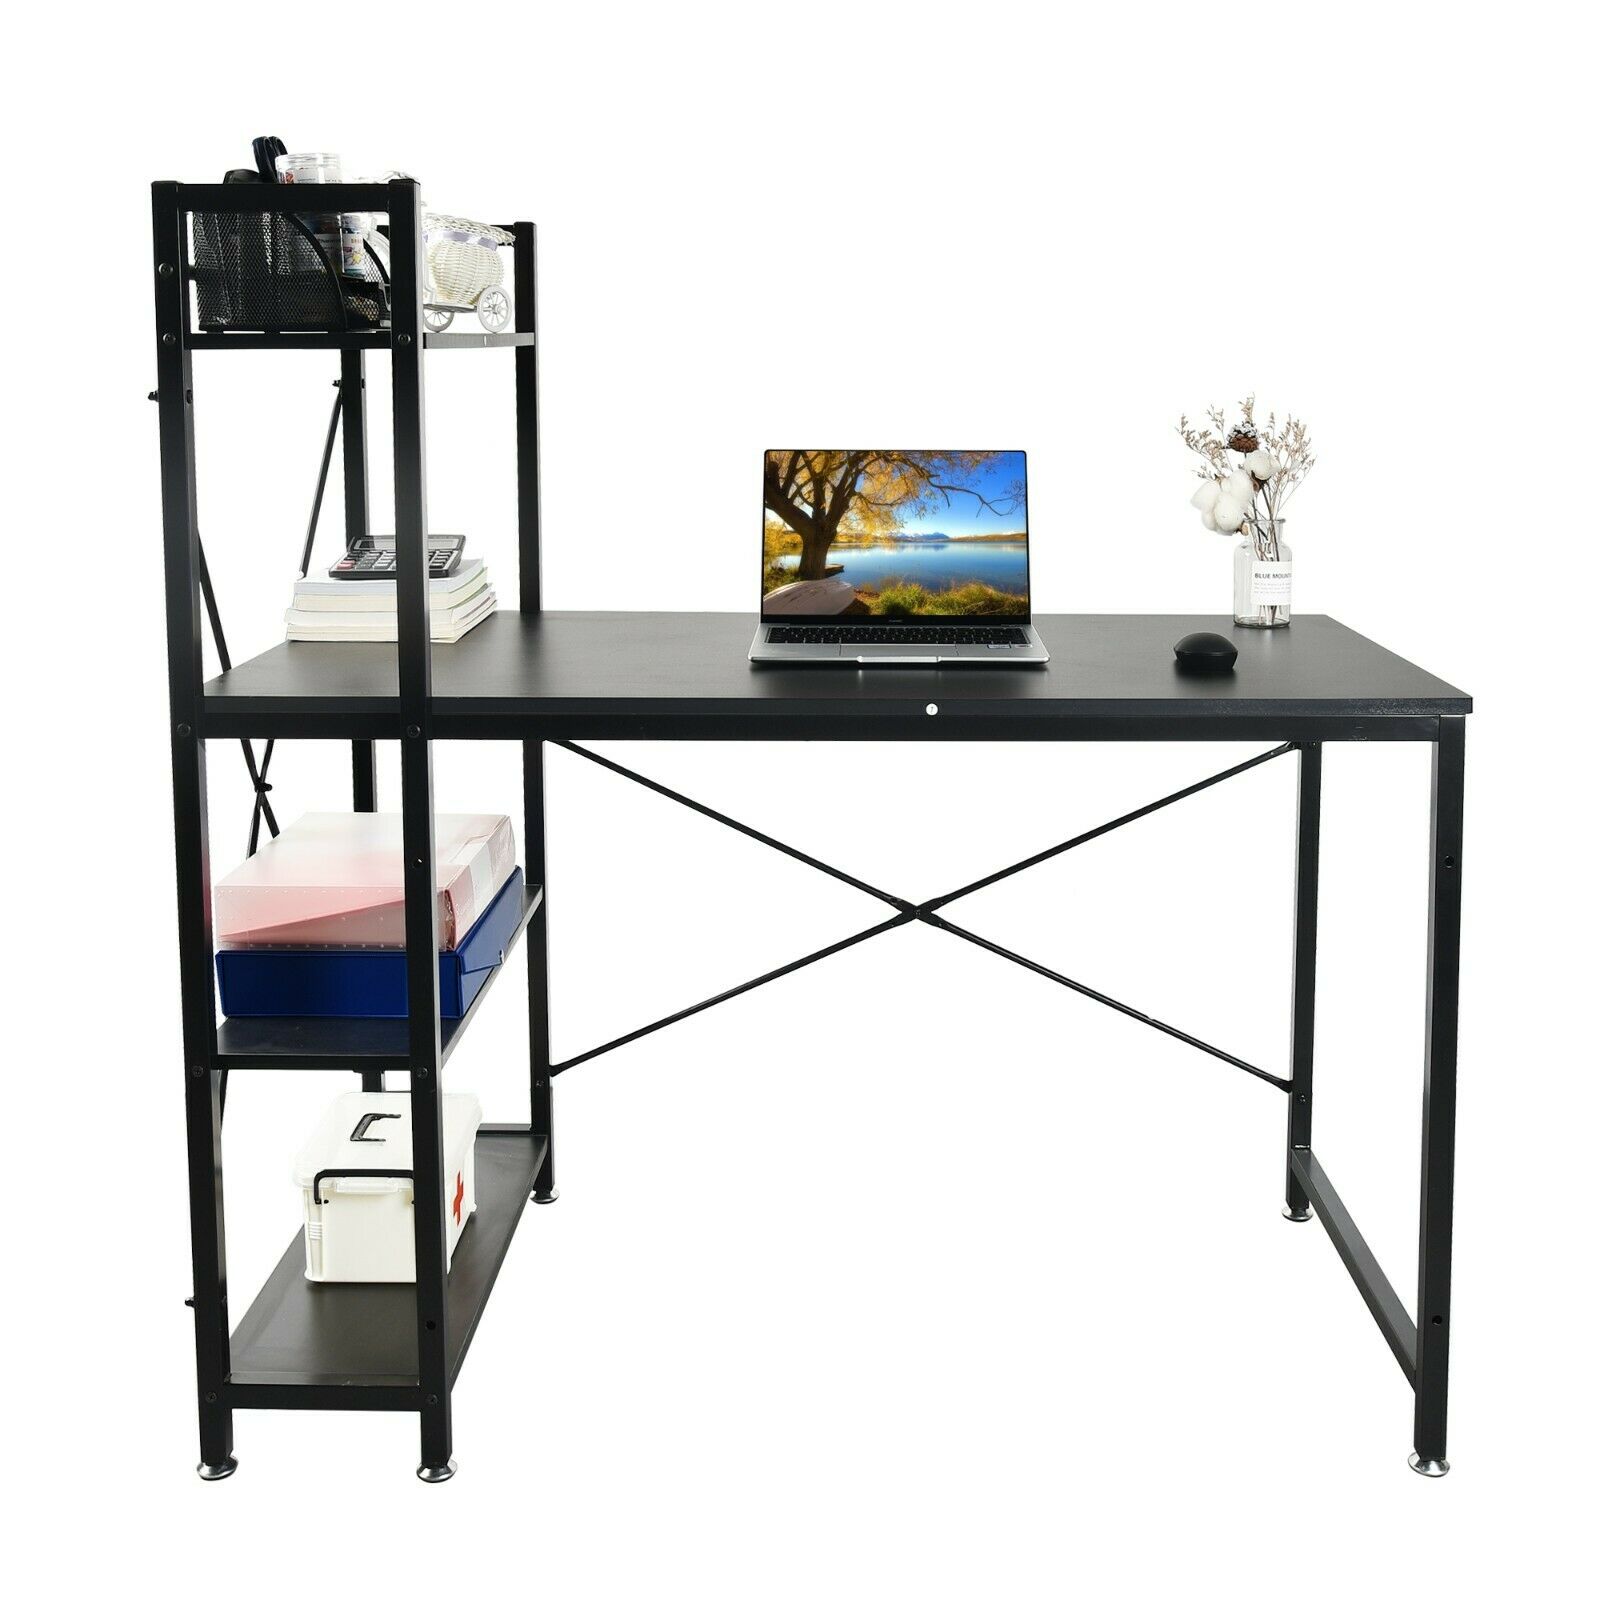 47" Computer Desk Home Office Study Writing Desk With Storage Shelf 4-Tiers